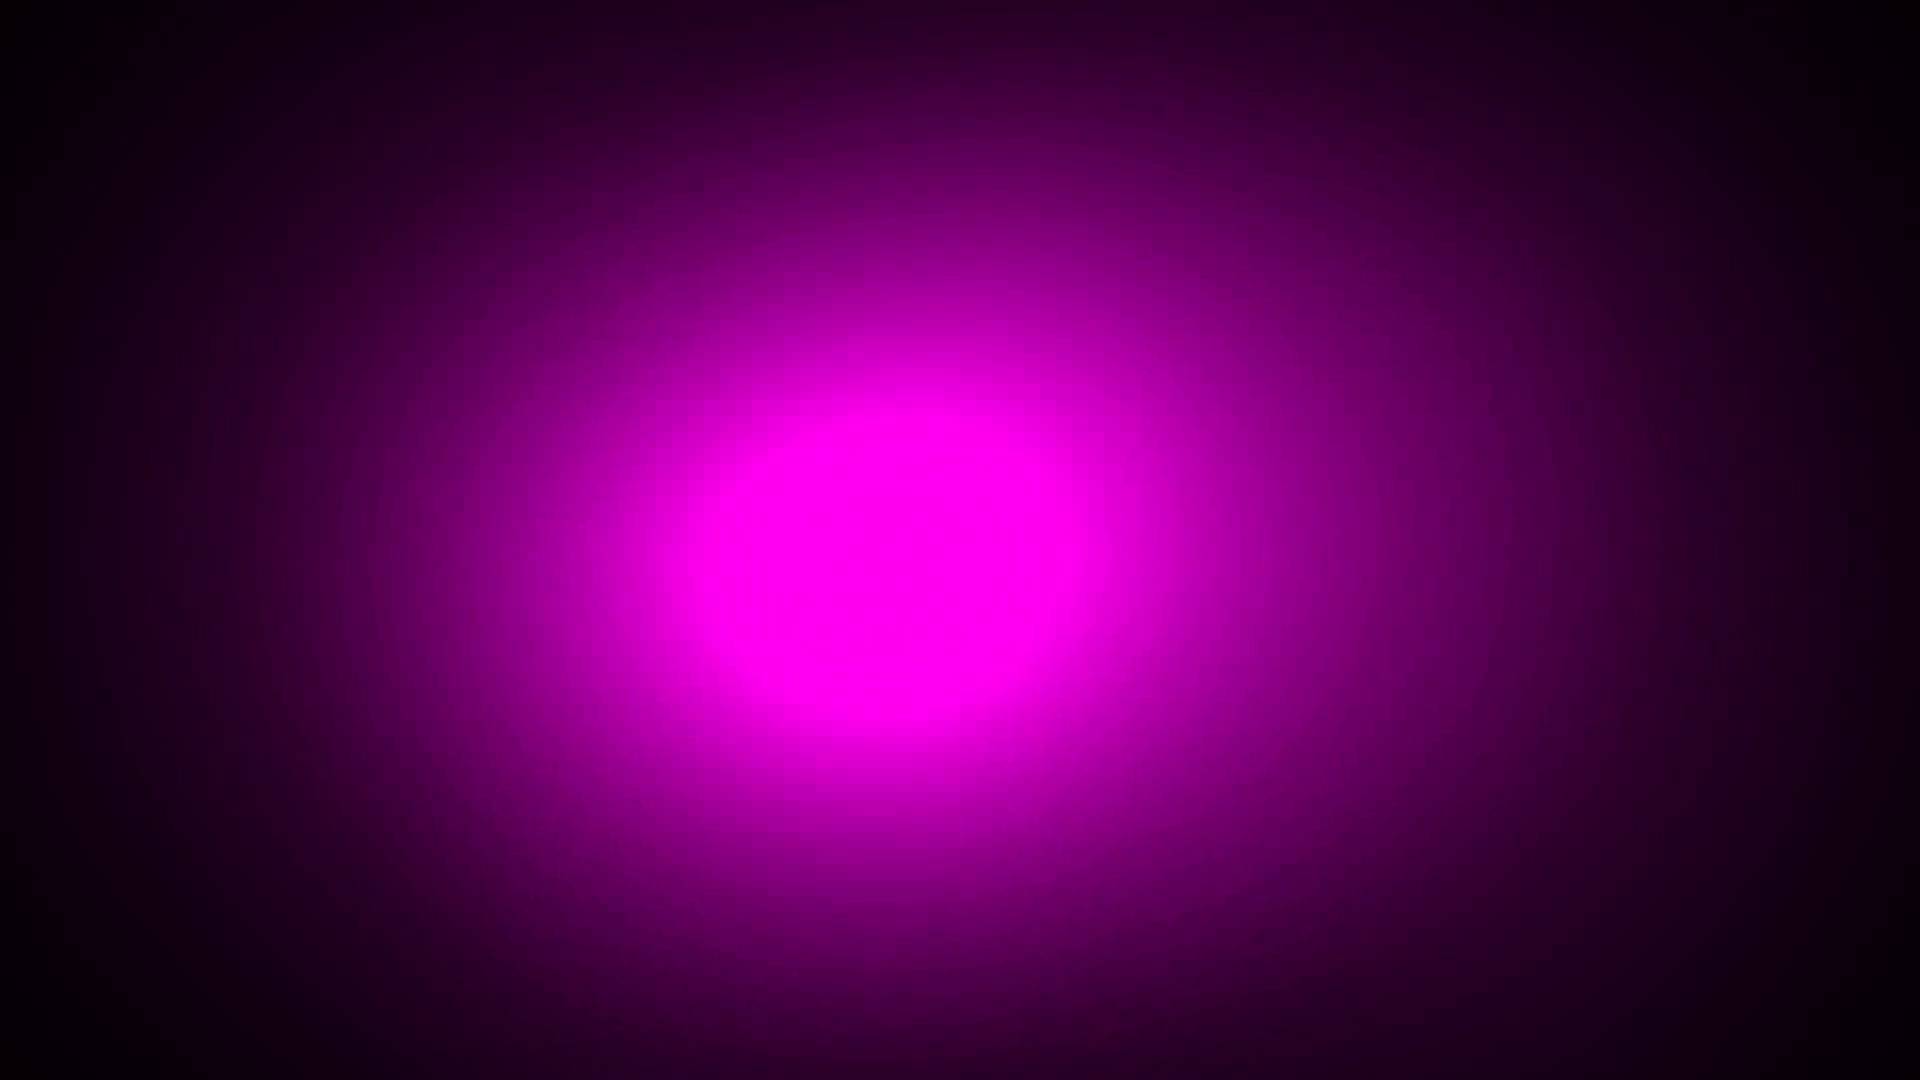 spirits pink FREE Video Background HD Loops 1080p - YouTube